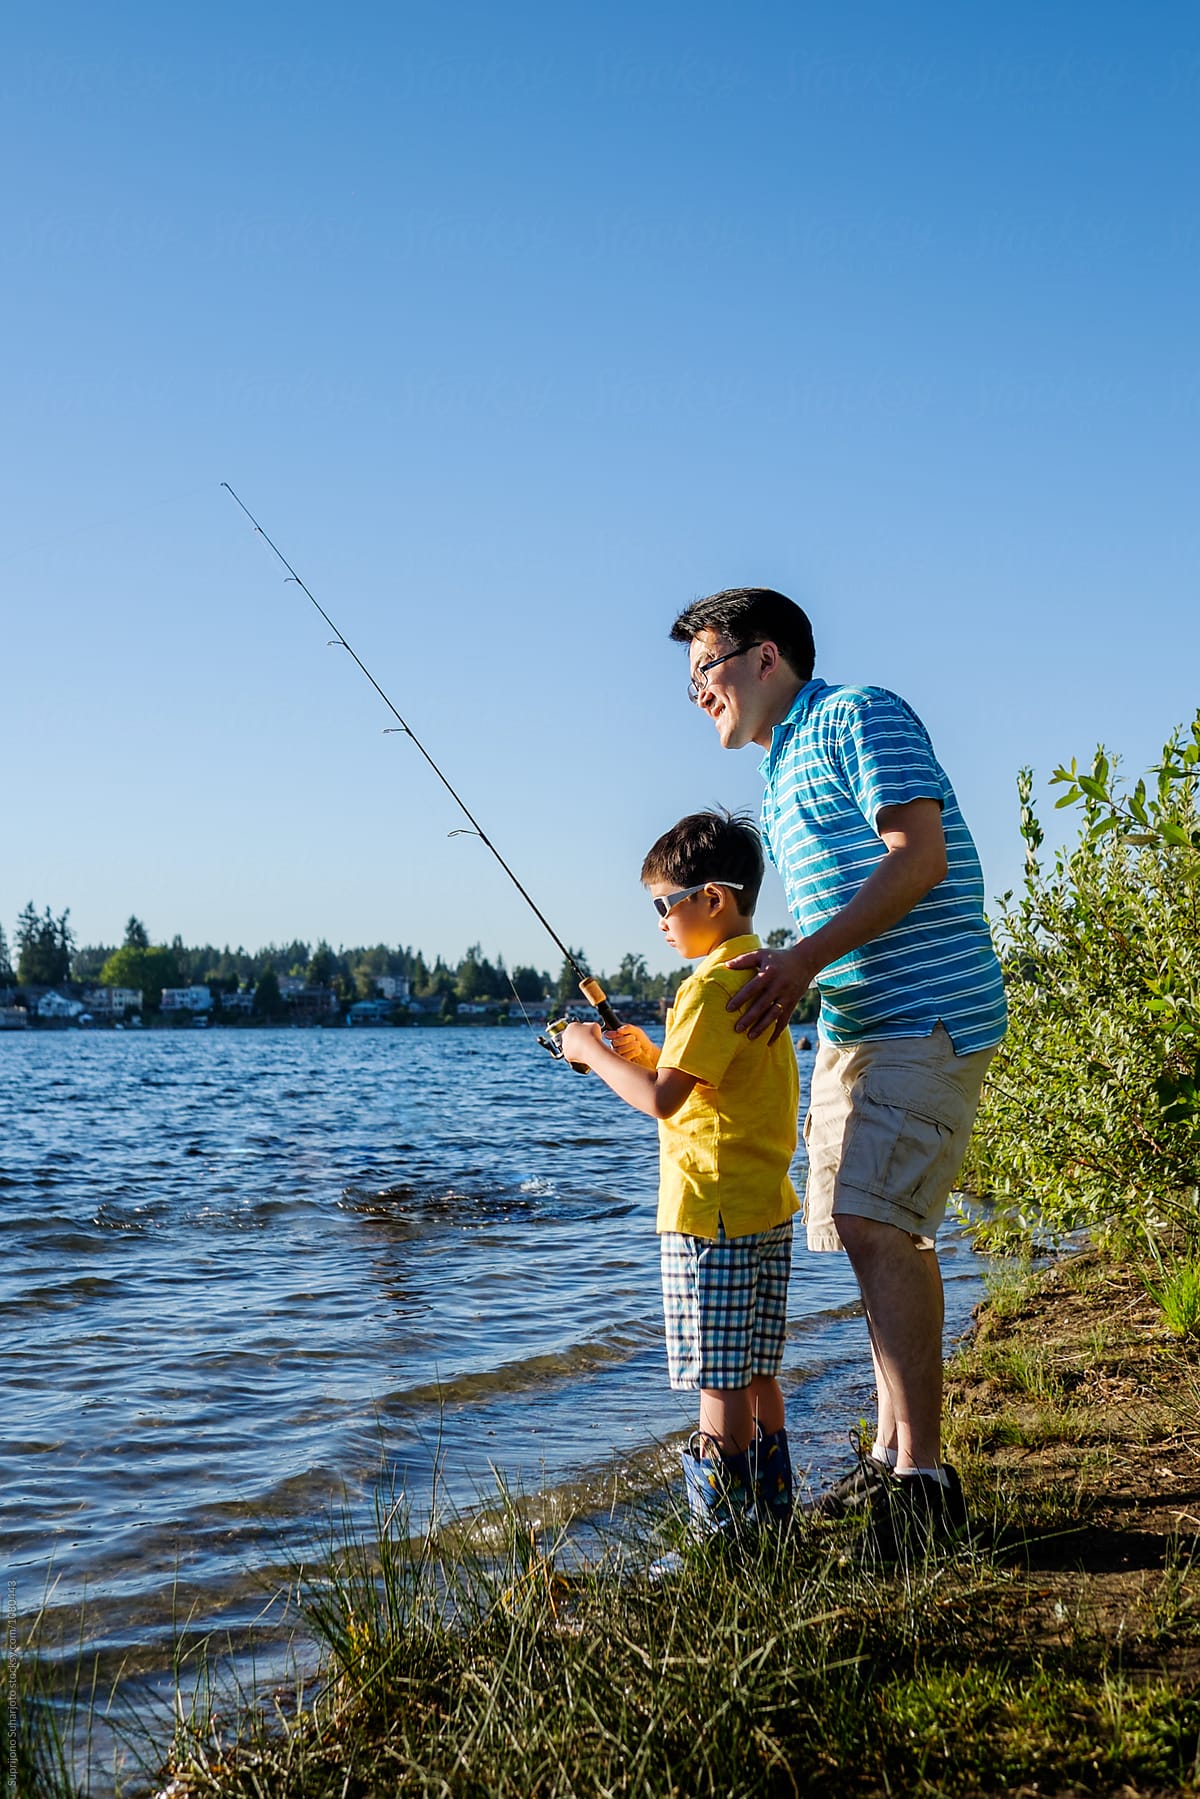 Happy Asian Father And His Son Going On A Fishing Trip To The Lake by  Stocksy Contributor Take A Pix Media - Stocksy